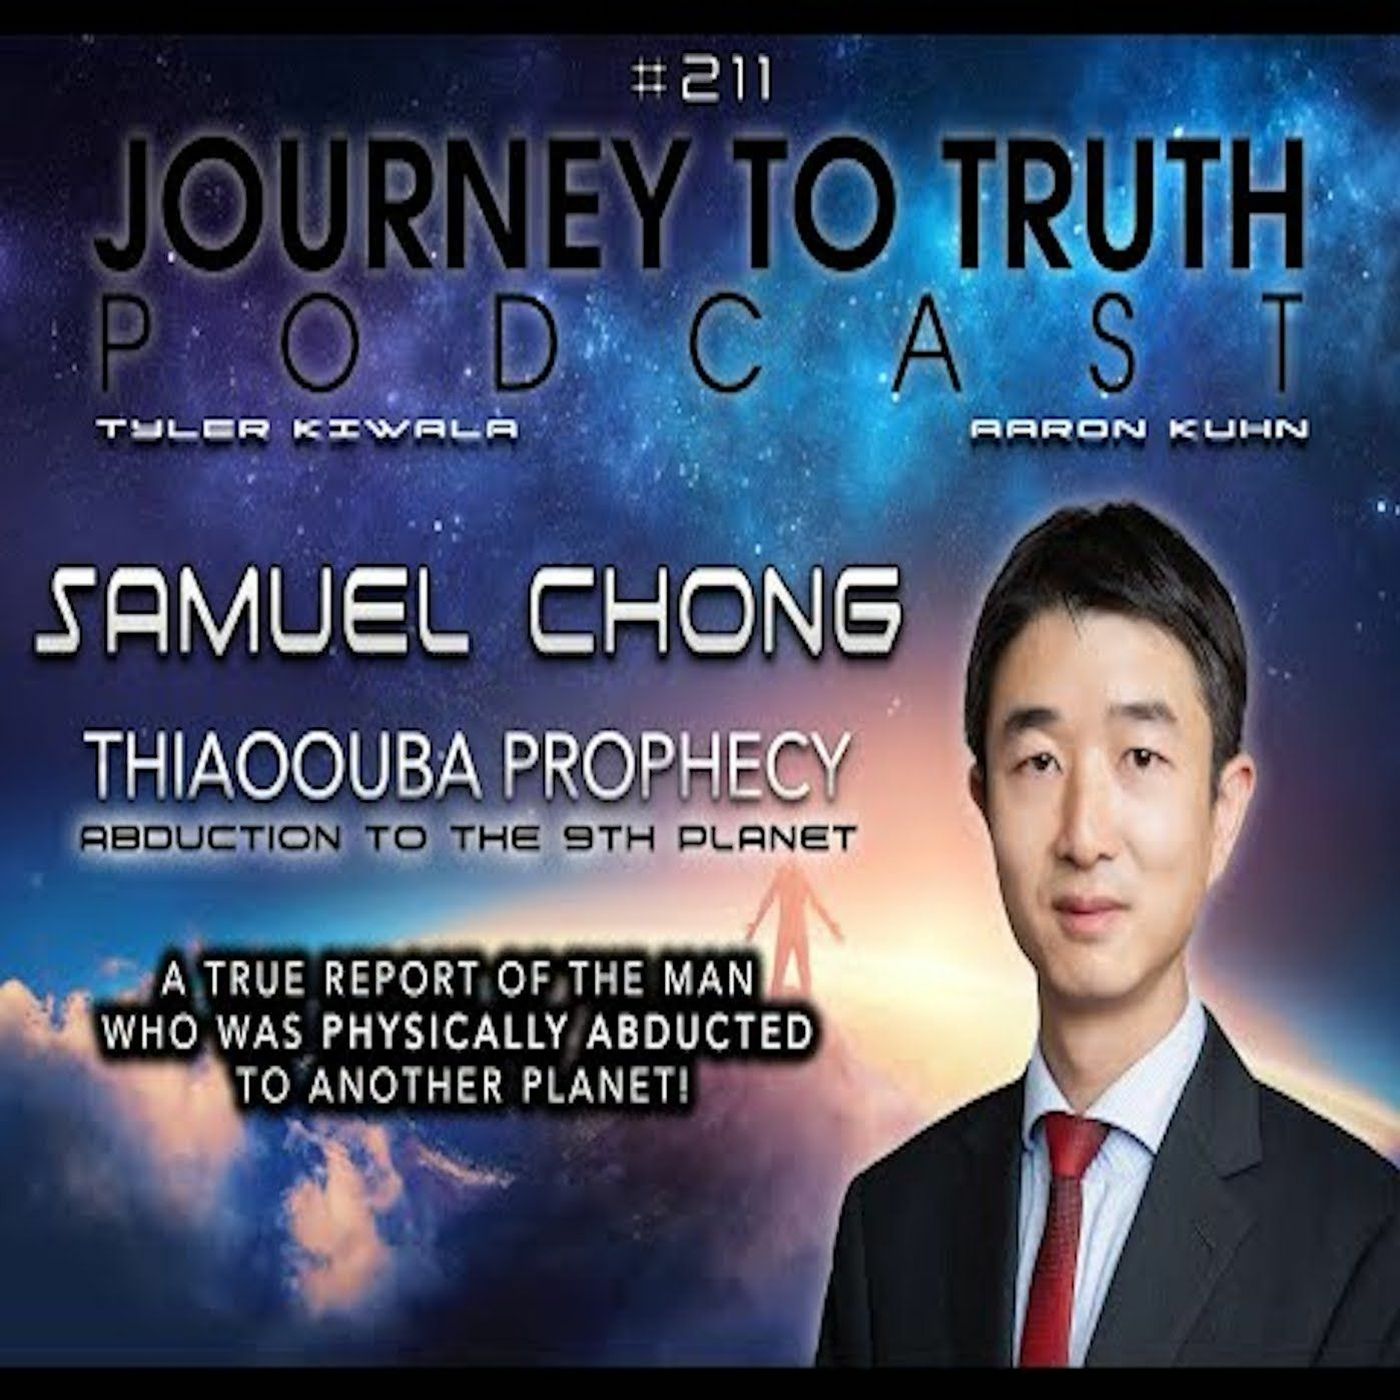 EP 211 - Samuel Chong: A True Report of the Man Who Was PHYSICALLY ABDUCTED To Another Planet